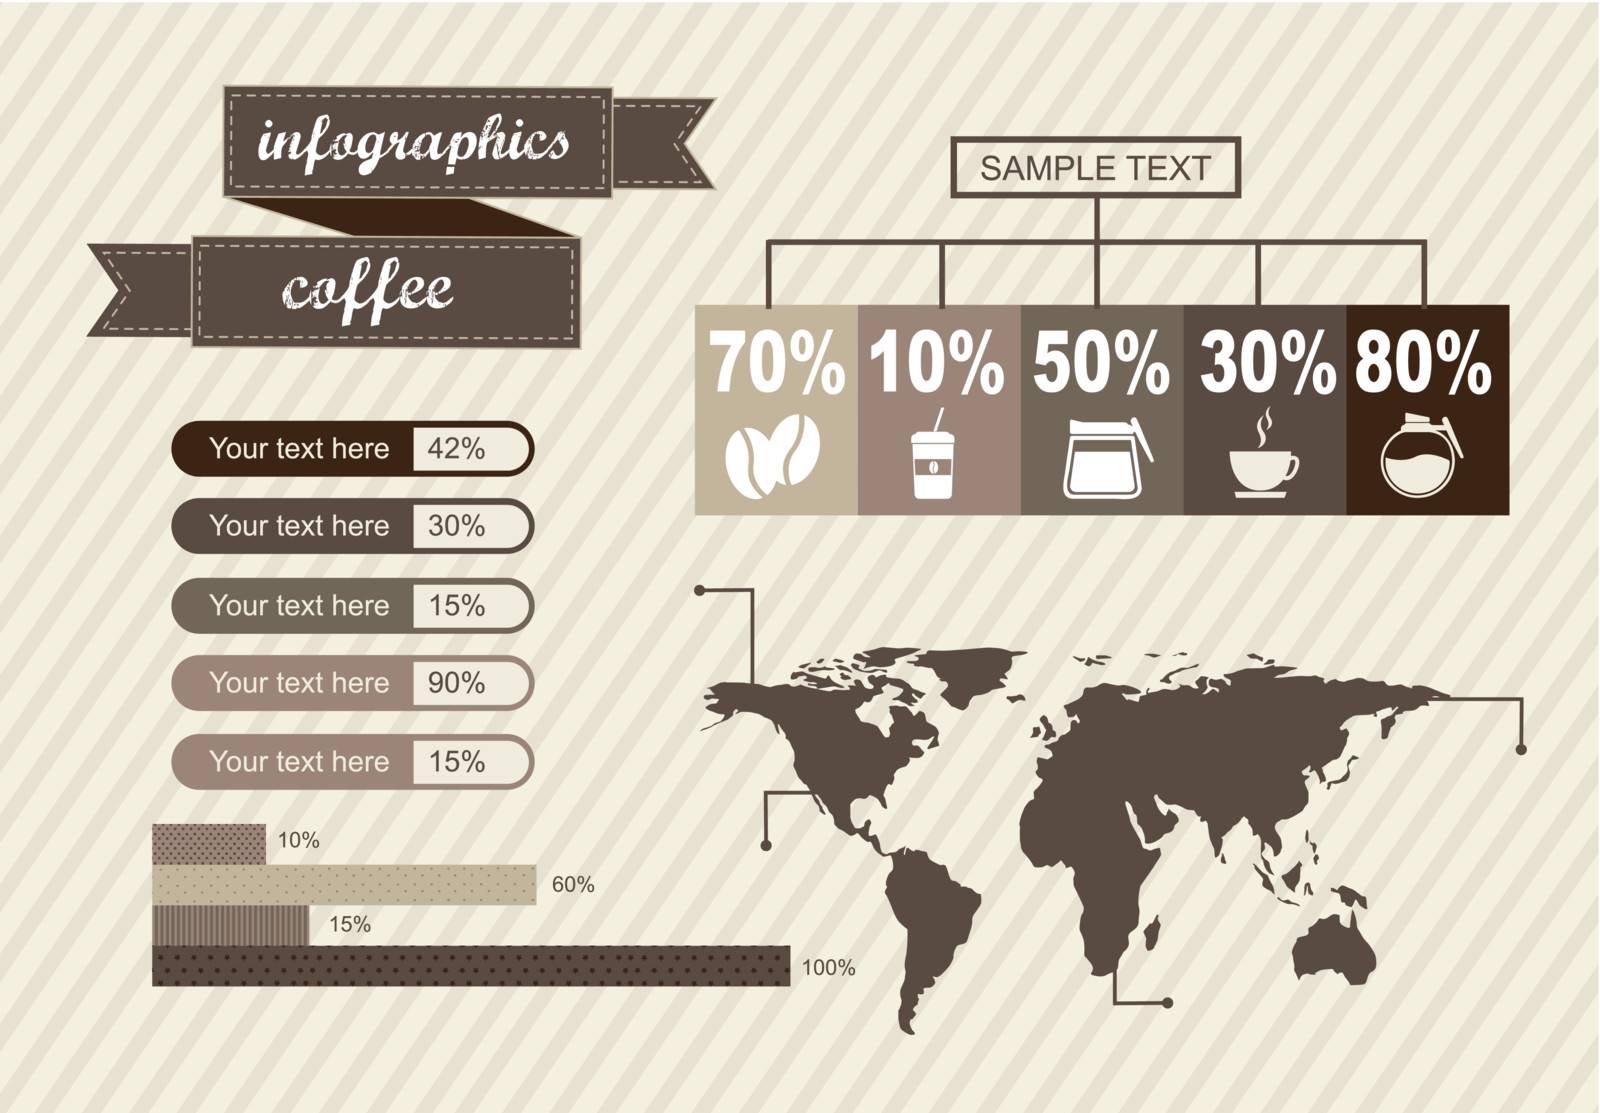 infographics of coffee, vintage style. vector illustration